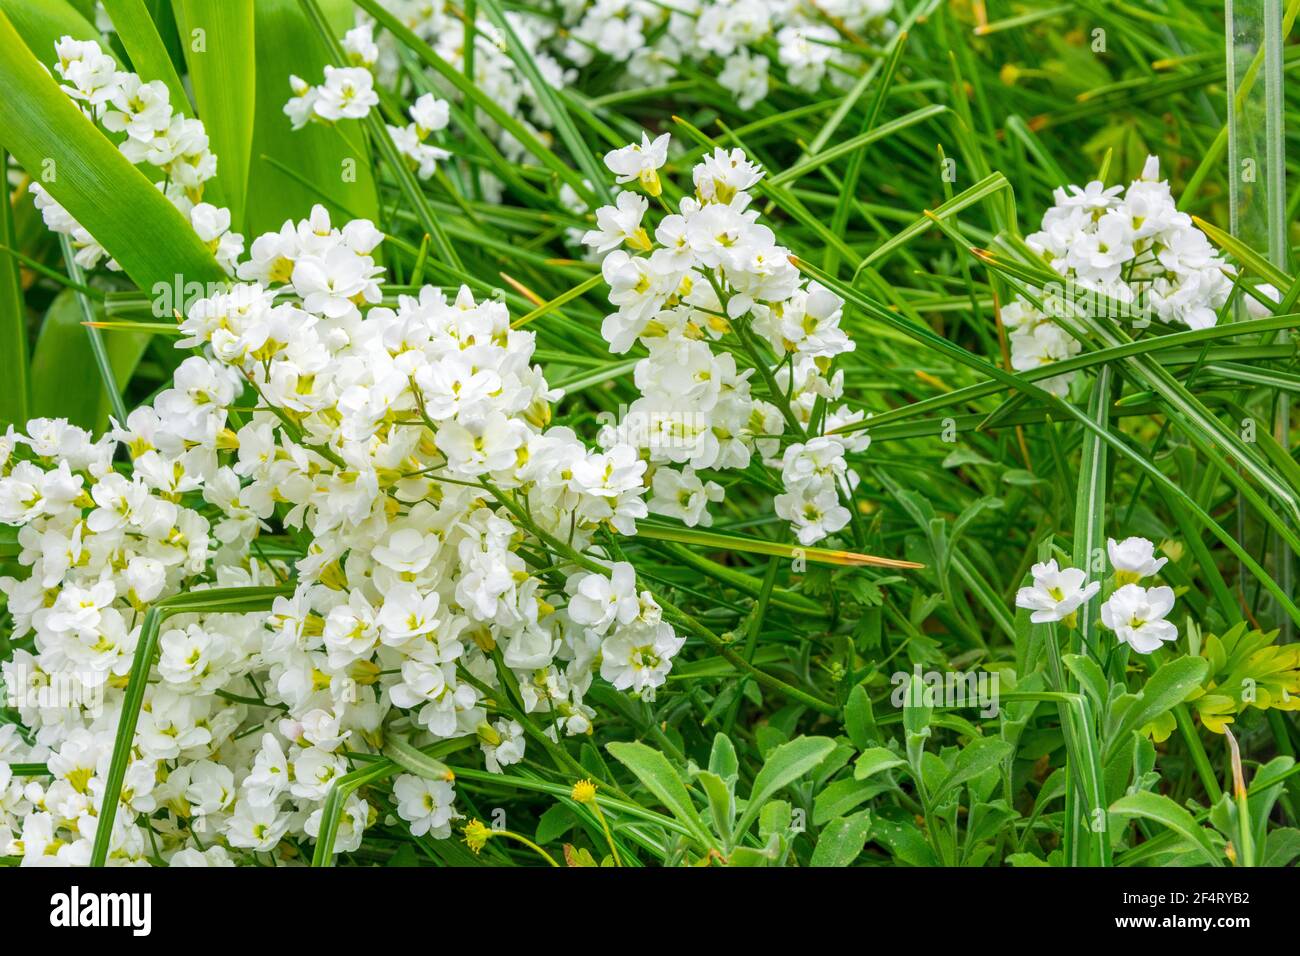 Arabis caucasica is a  flowering plant in the mustard family Brassicaceae  , garden arabis, mountain rock cress or Caucasian rockcress. Evergreen pere Stock Photo